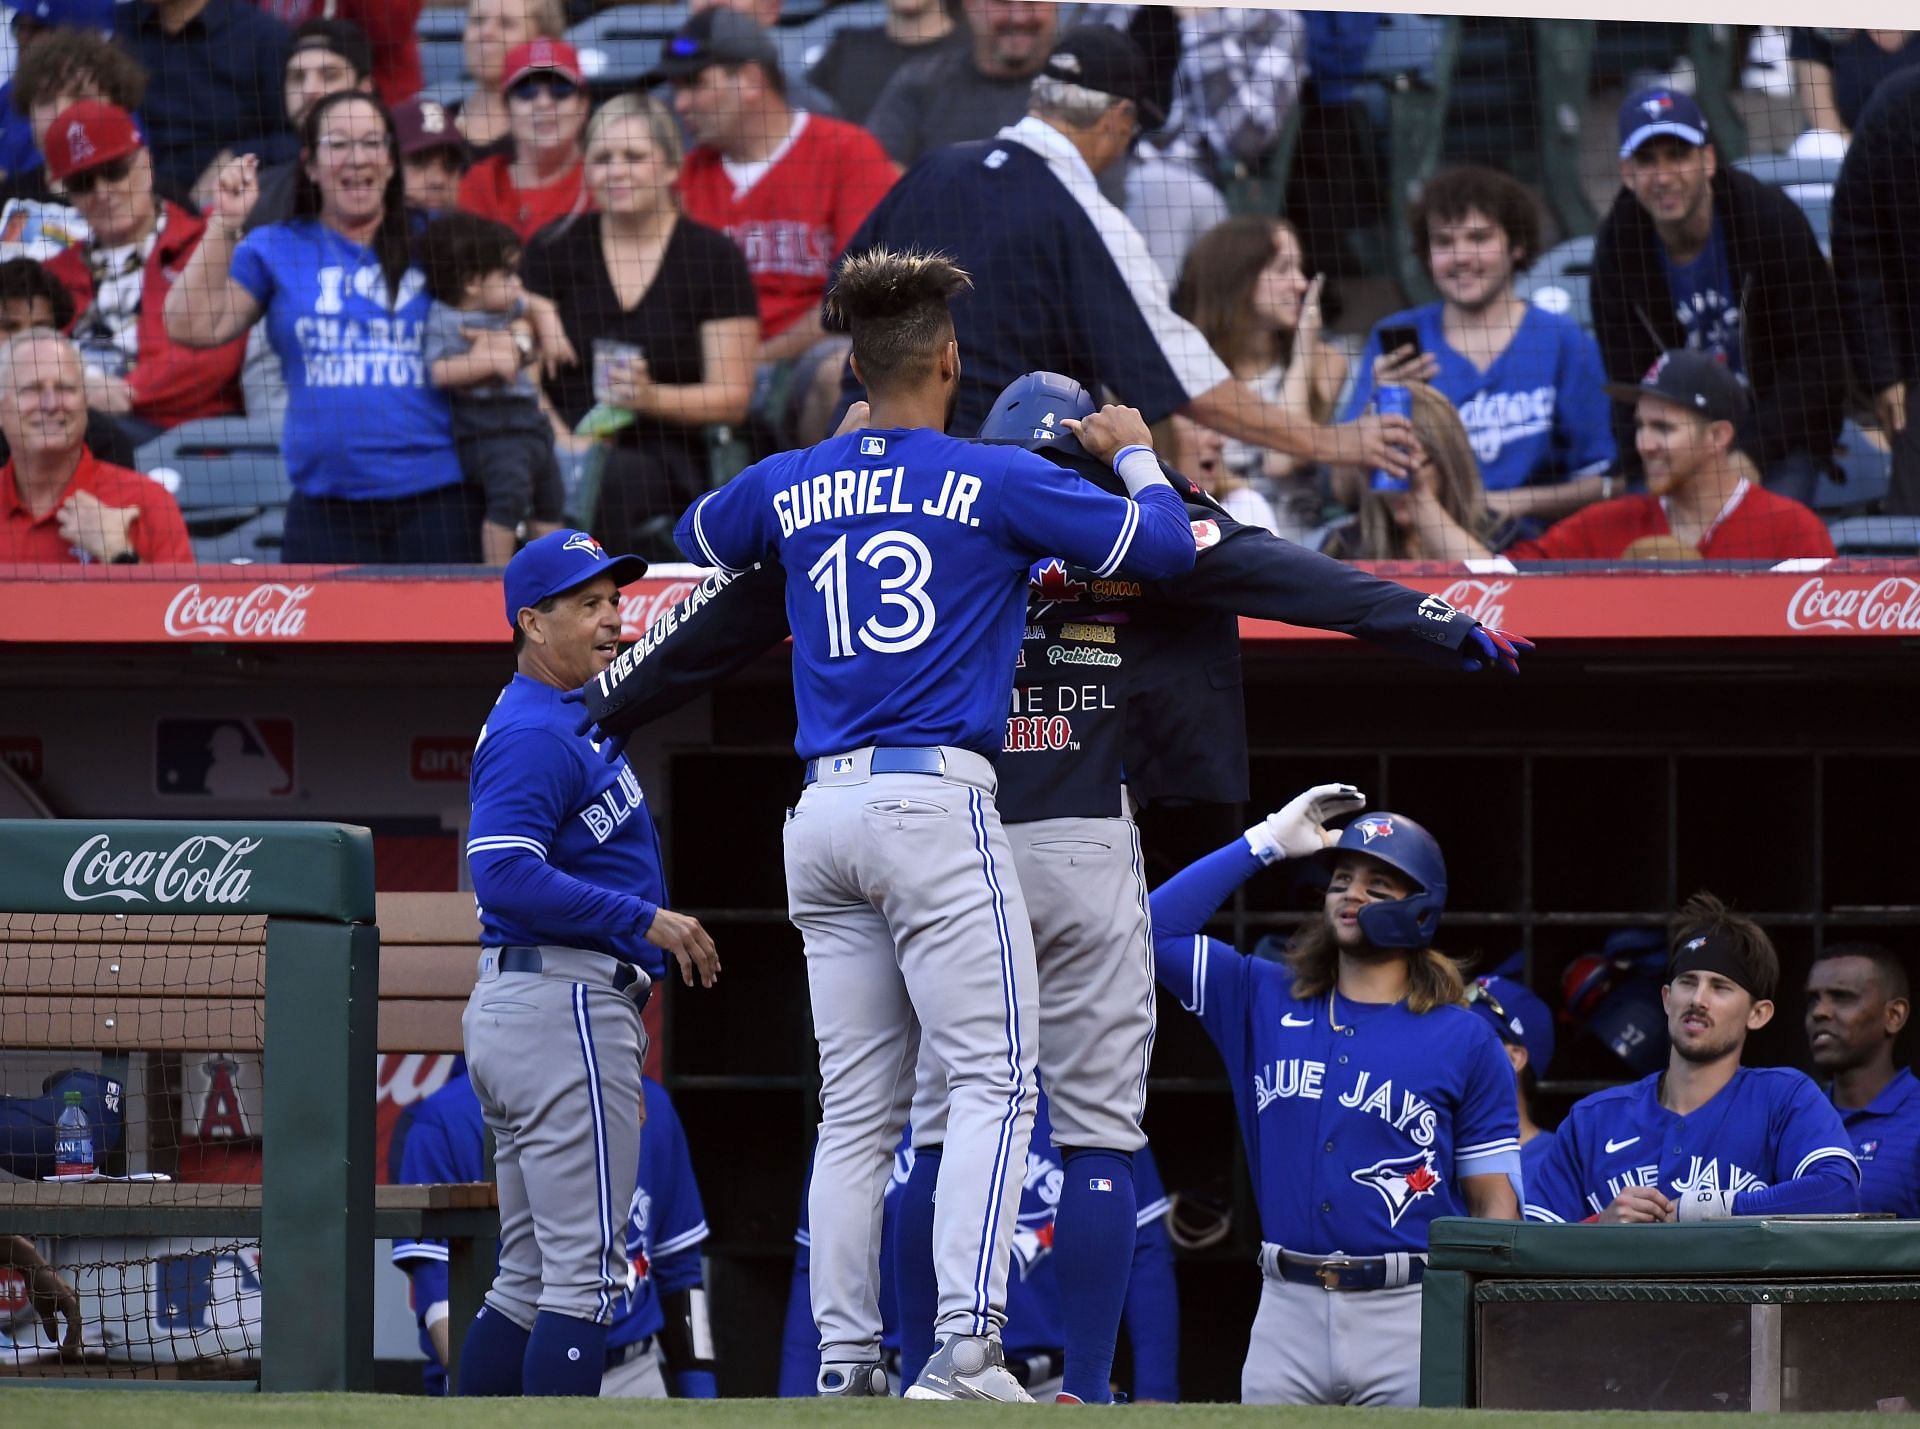 MLB Roundup: Toronto Blue Jays register 5 straight wins after sweeping  Shohei Ohtani and company; Los Angeles Dodgers Trea Turner enters Memorial  Day with a hitting streak of 21 games - May 30, 2022